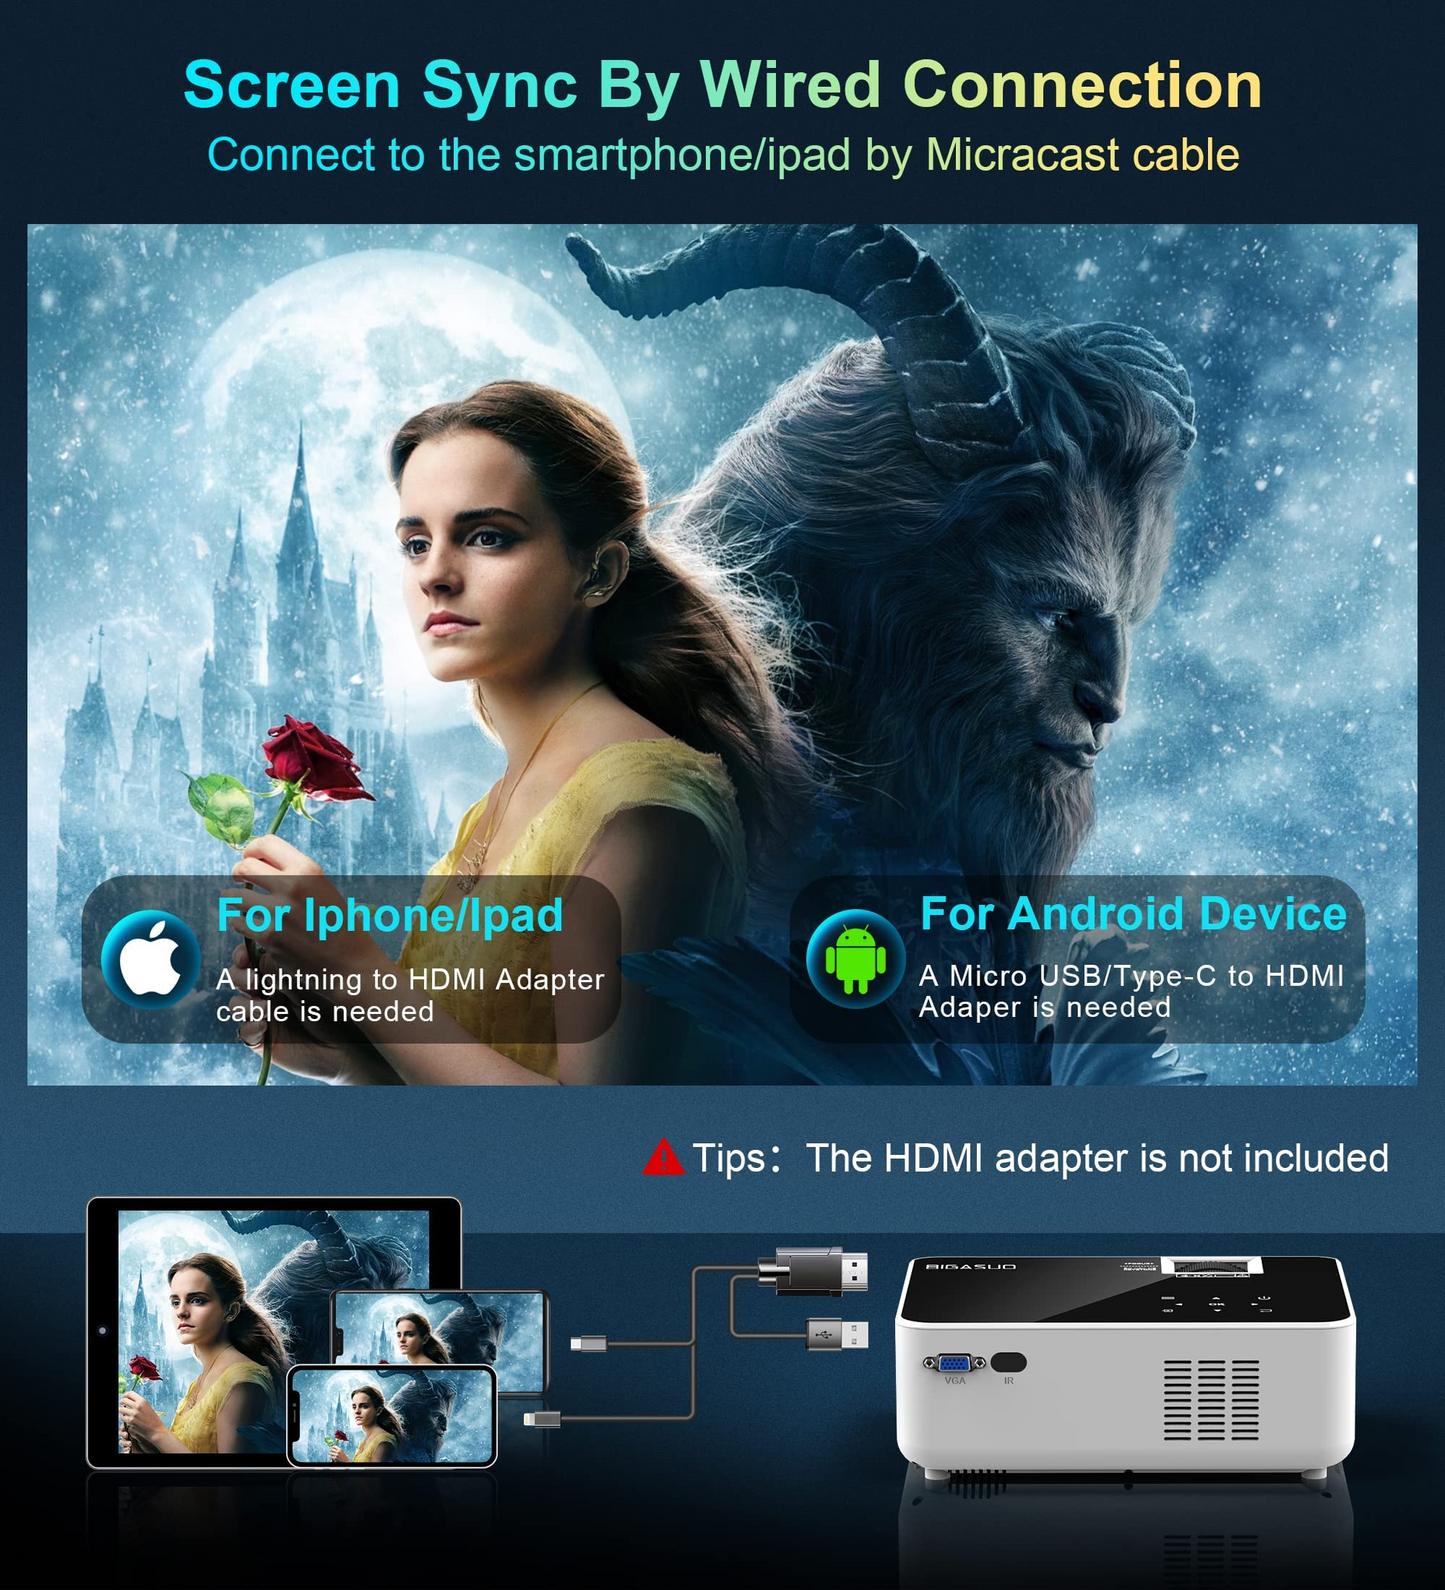 Native 1080P Bluetooth Projector with Screen - BIGASUO 8500L Outdoor Movie Projector, 230'' Home Theater Projector Touch Screen Compatible with iOS, Android, TV Stick, HDMI, Laptop, PC, PS4